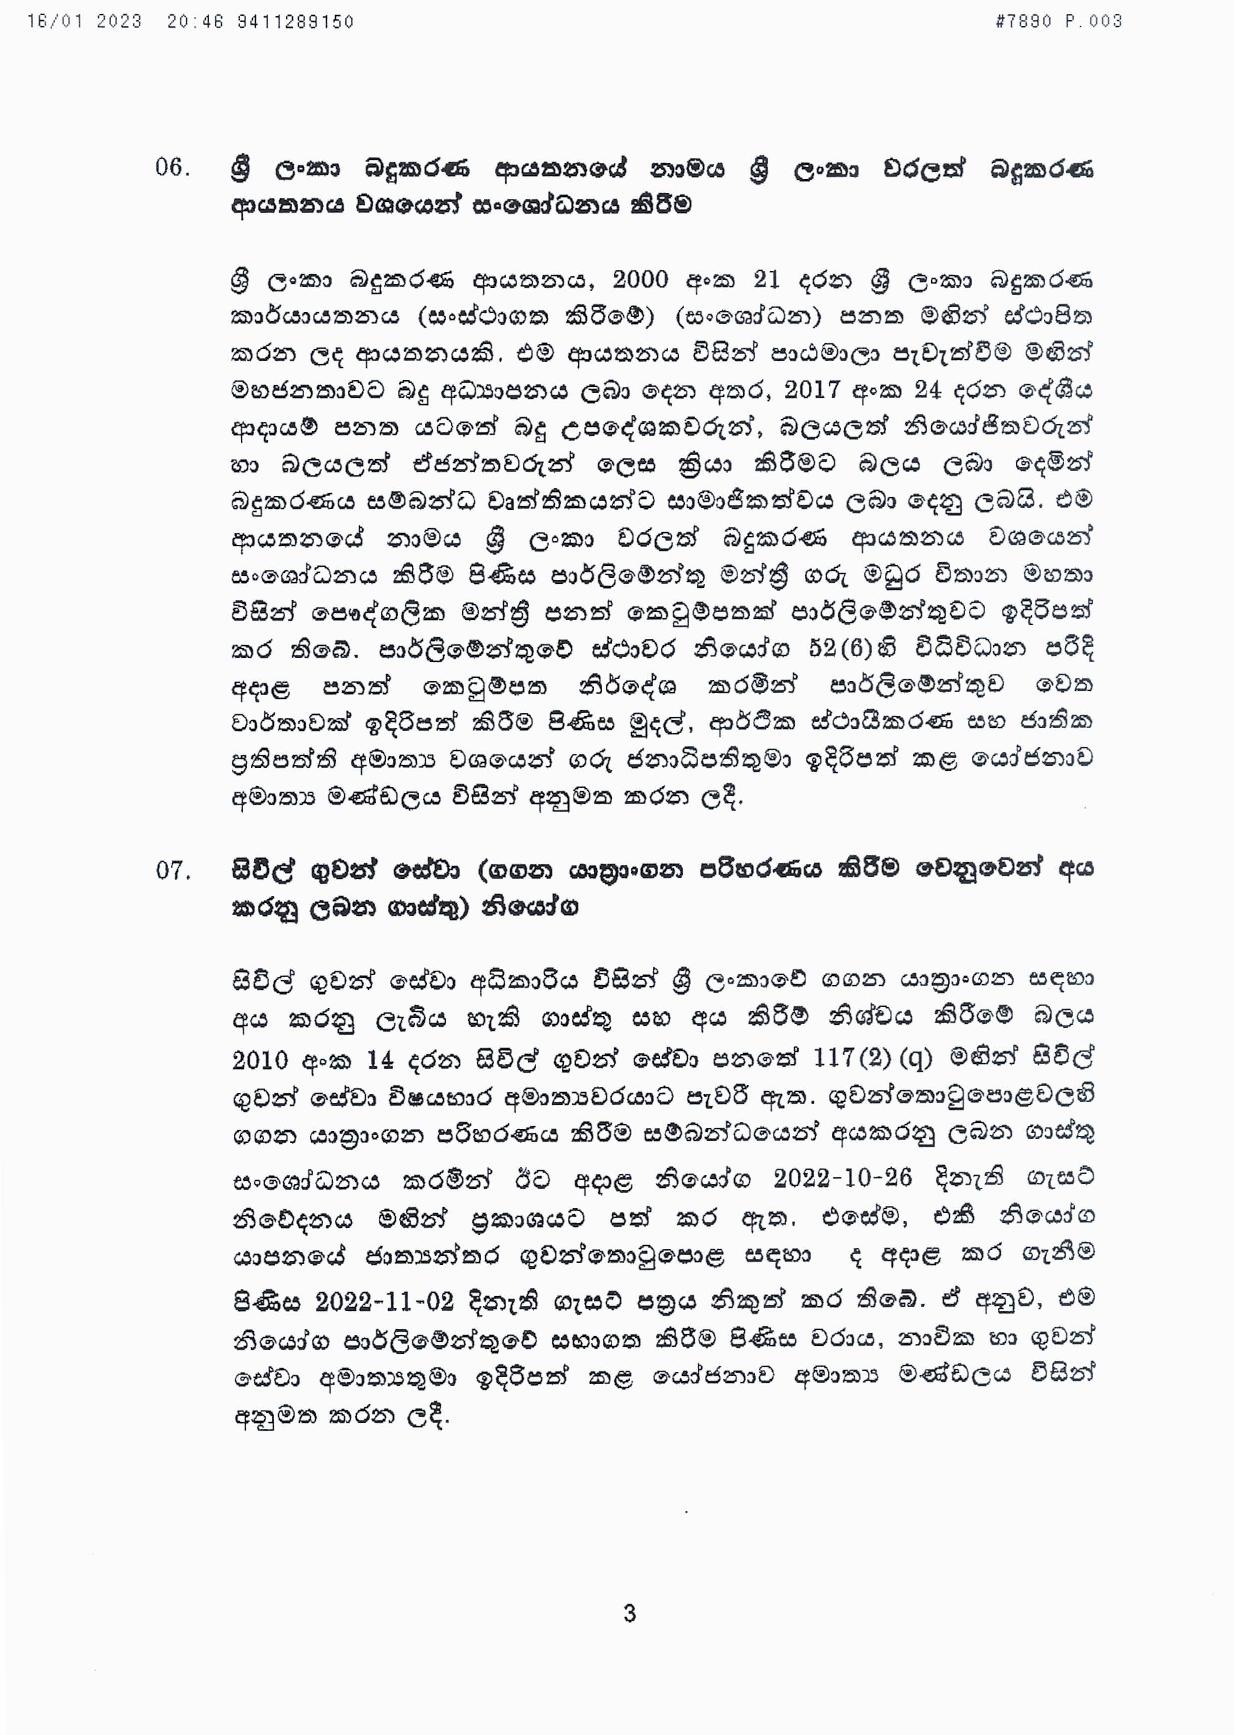 Cabinet Decision on 16.01.2023 page 003